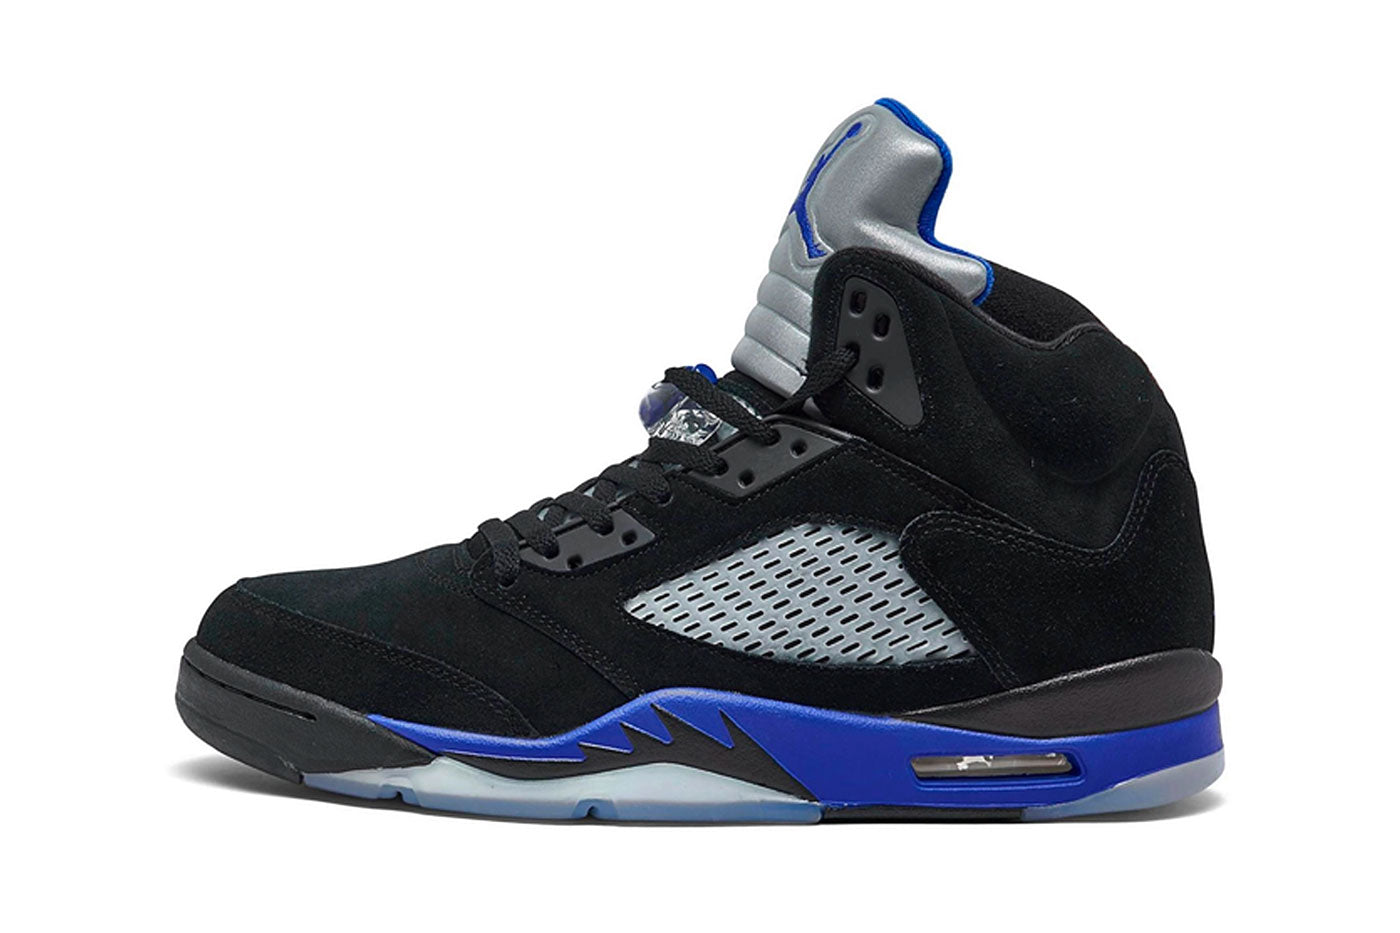 Official images of the Air Jordan 5 ‘Racer Blue’